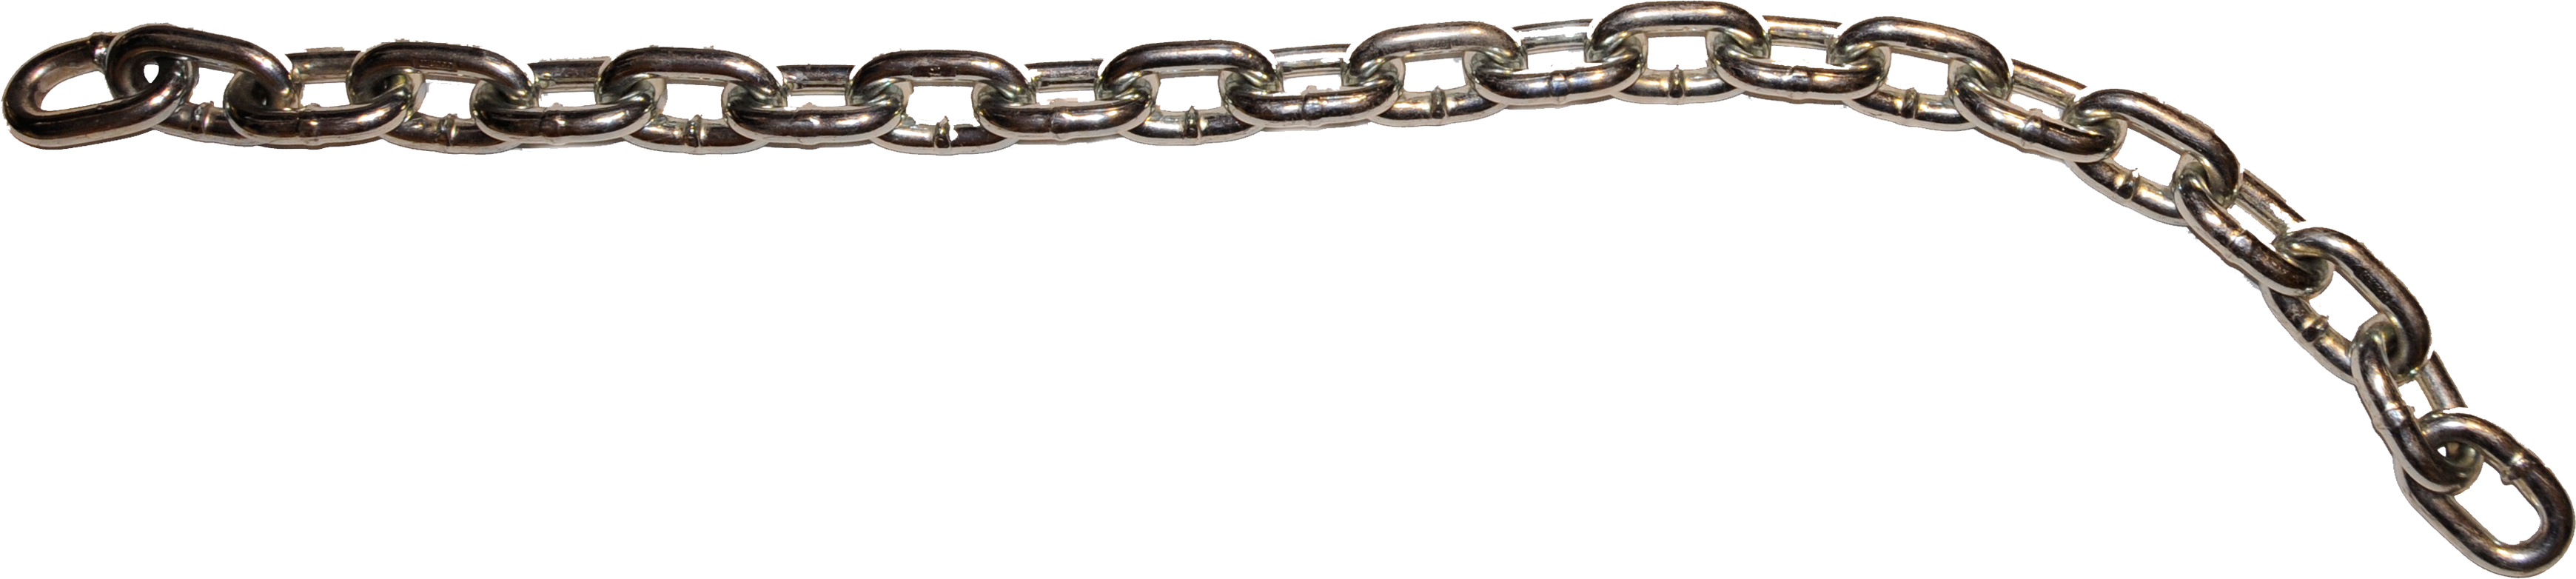 Chain PNG image, Chain PNG - Free PNG